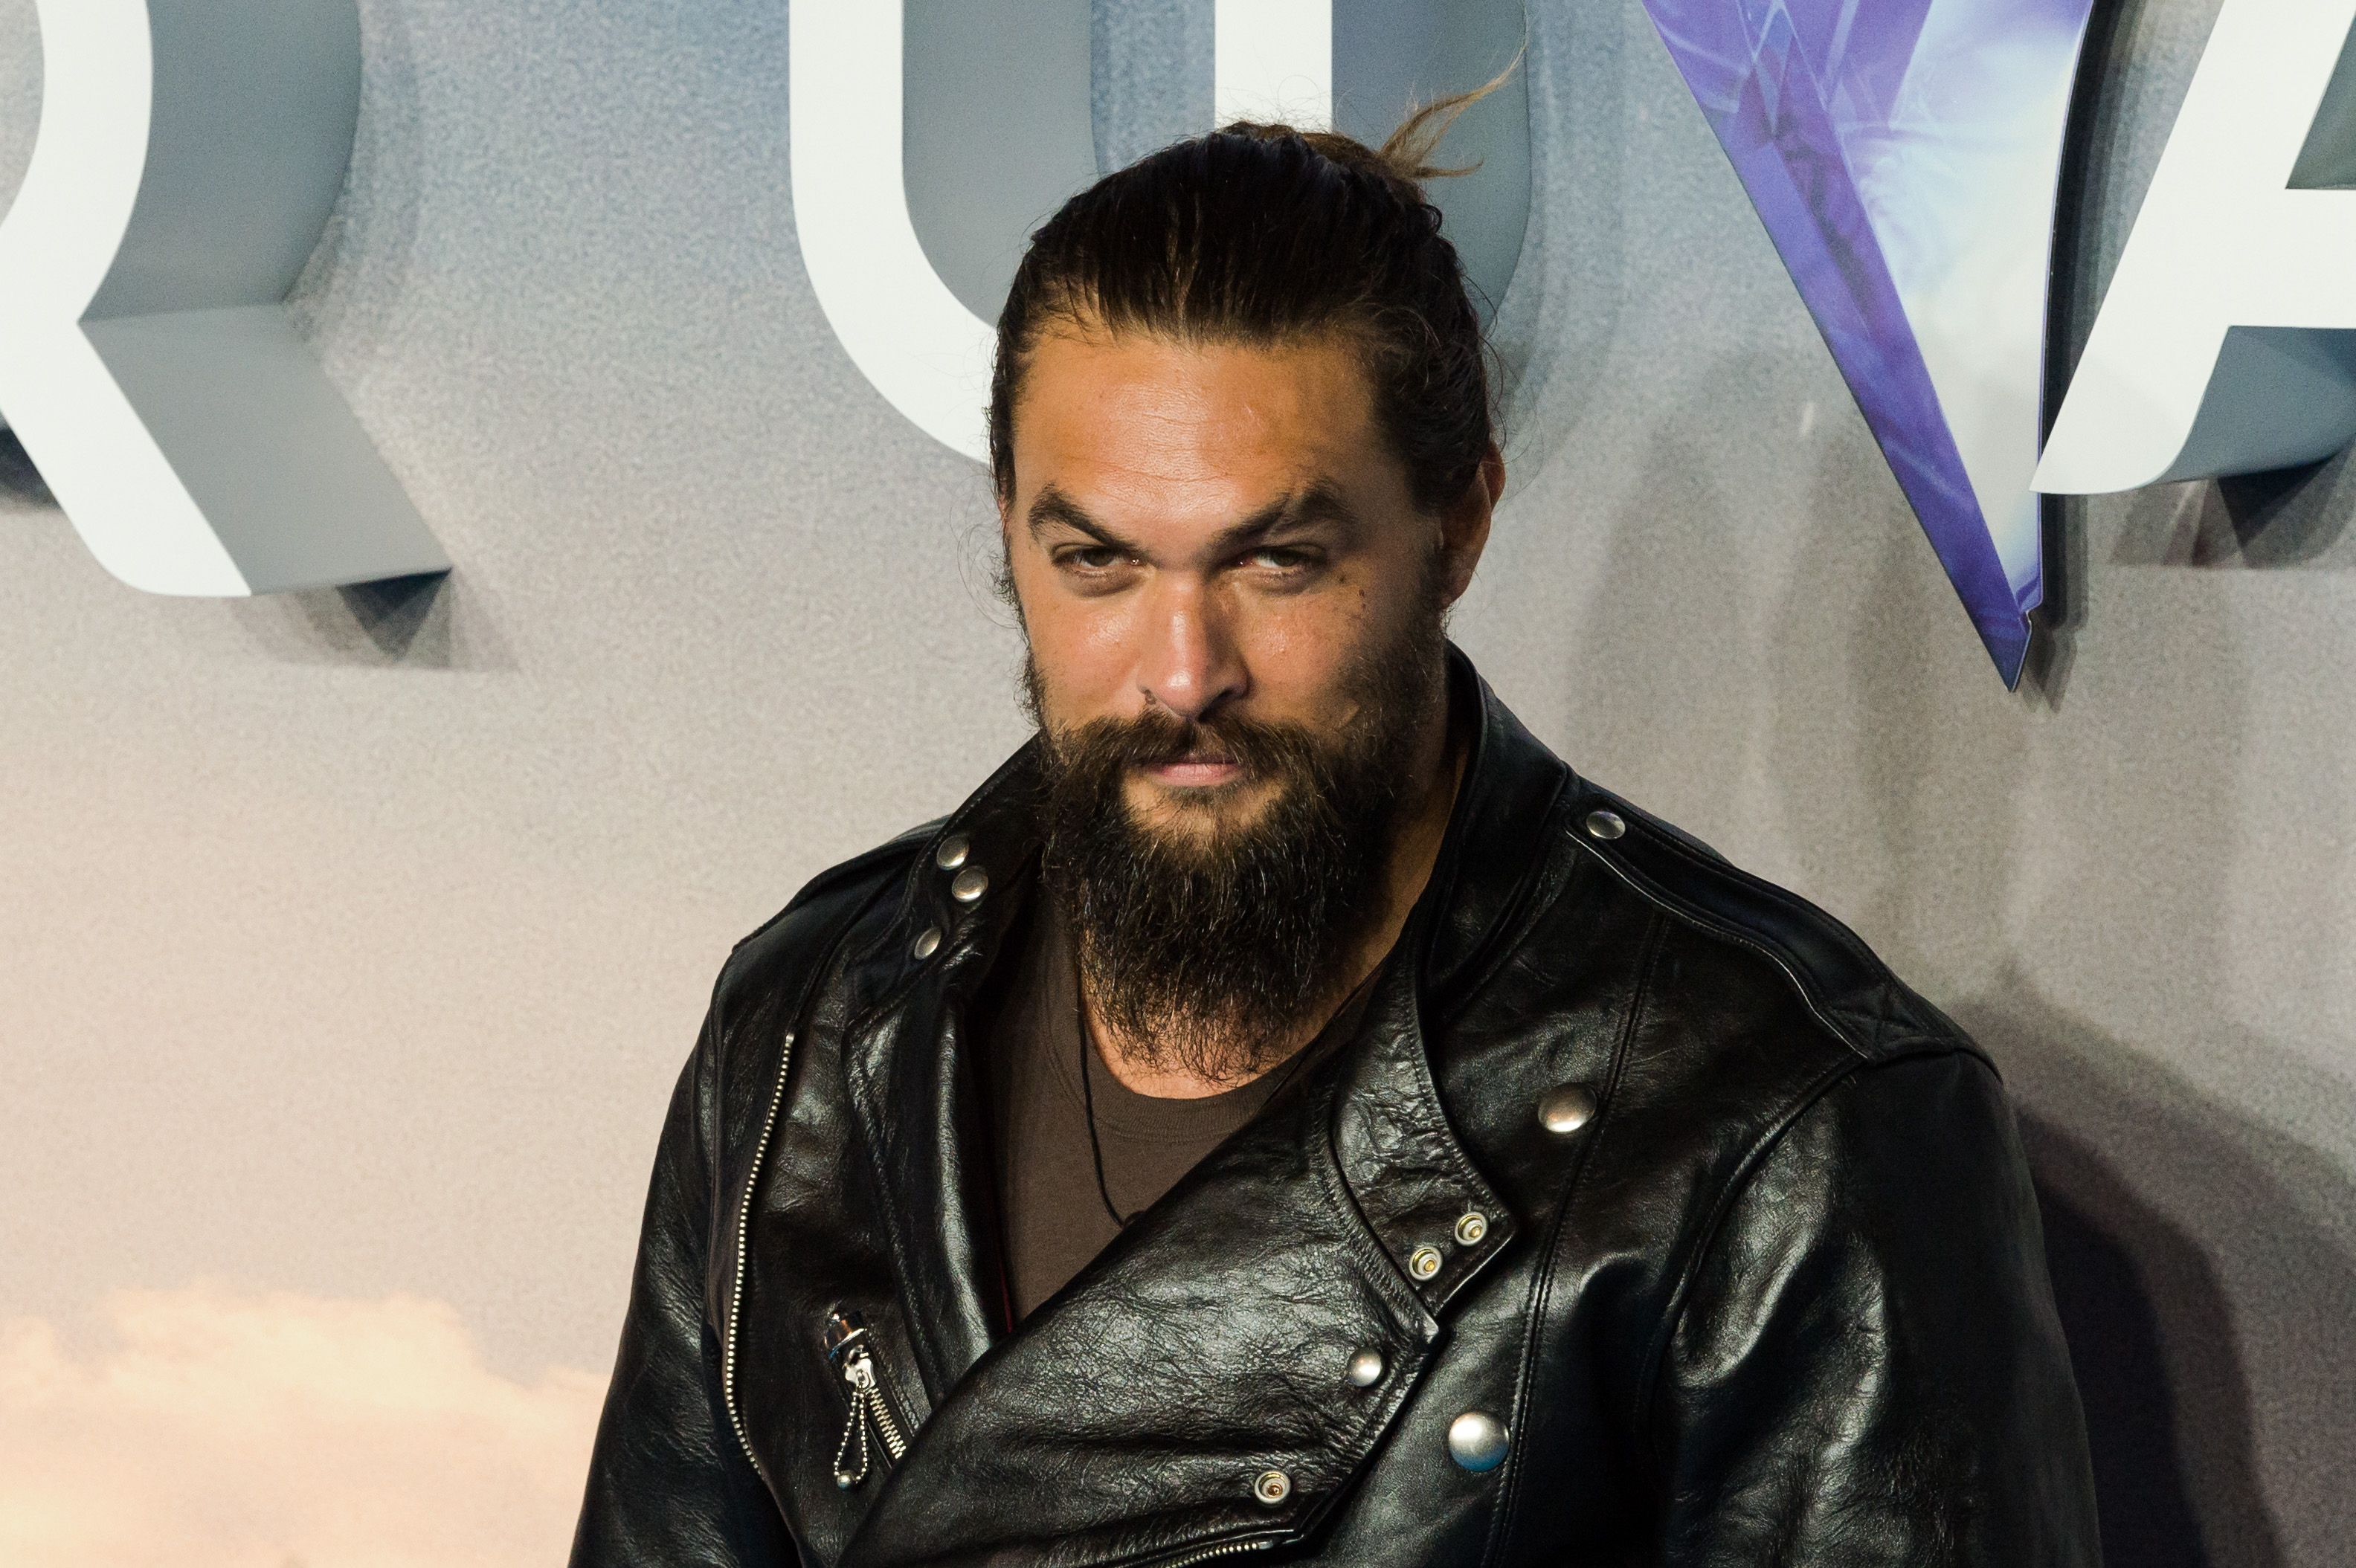 Jason Momoa attends the World Premiere of 'Aquaman' at Cineworld in London's Leicester Square on November 26, 2018, in London, United Kingdom. | Source: Getty Images